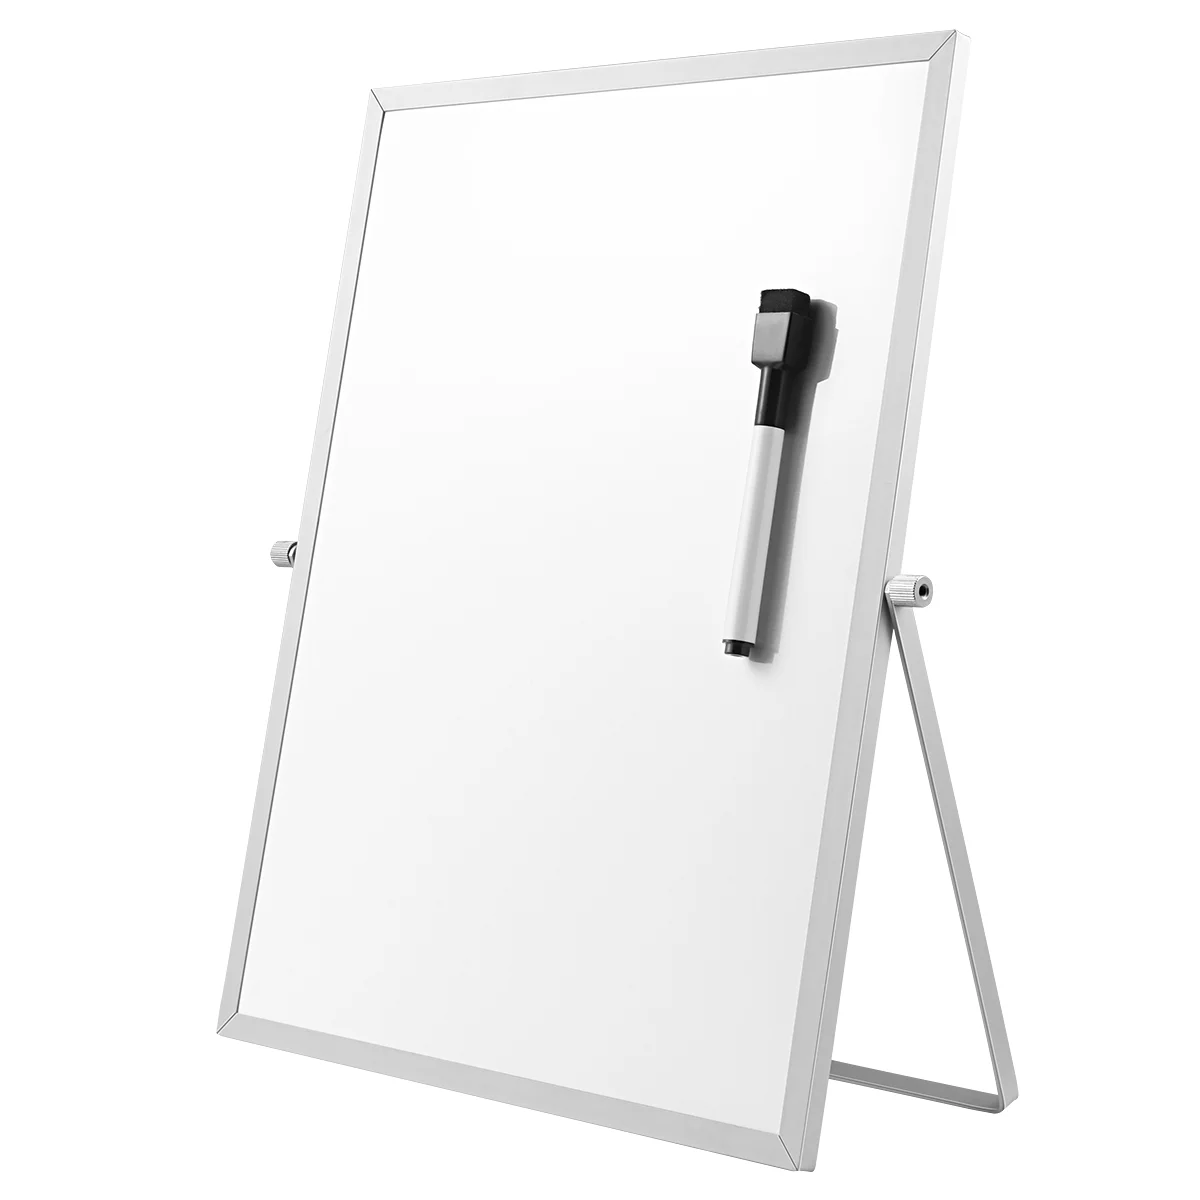 double sided white board dry erase white board erasable writing whiteboard for home office big blackboard Magnetic White Board Dry Erase Board Double Sided Practical with Stand White Board for Office School Home